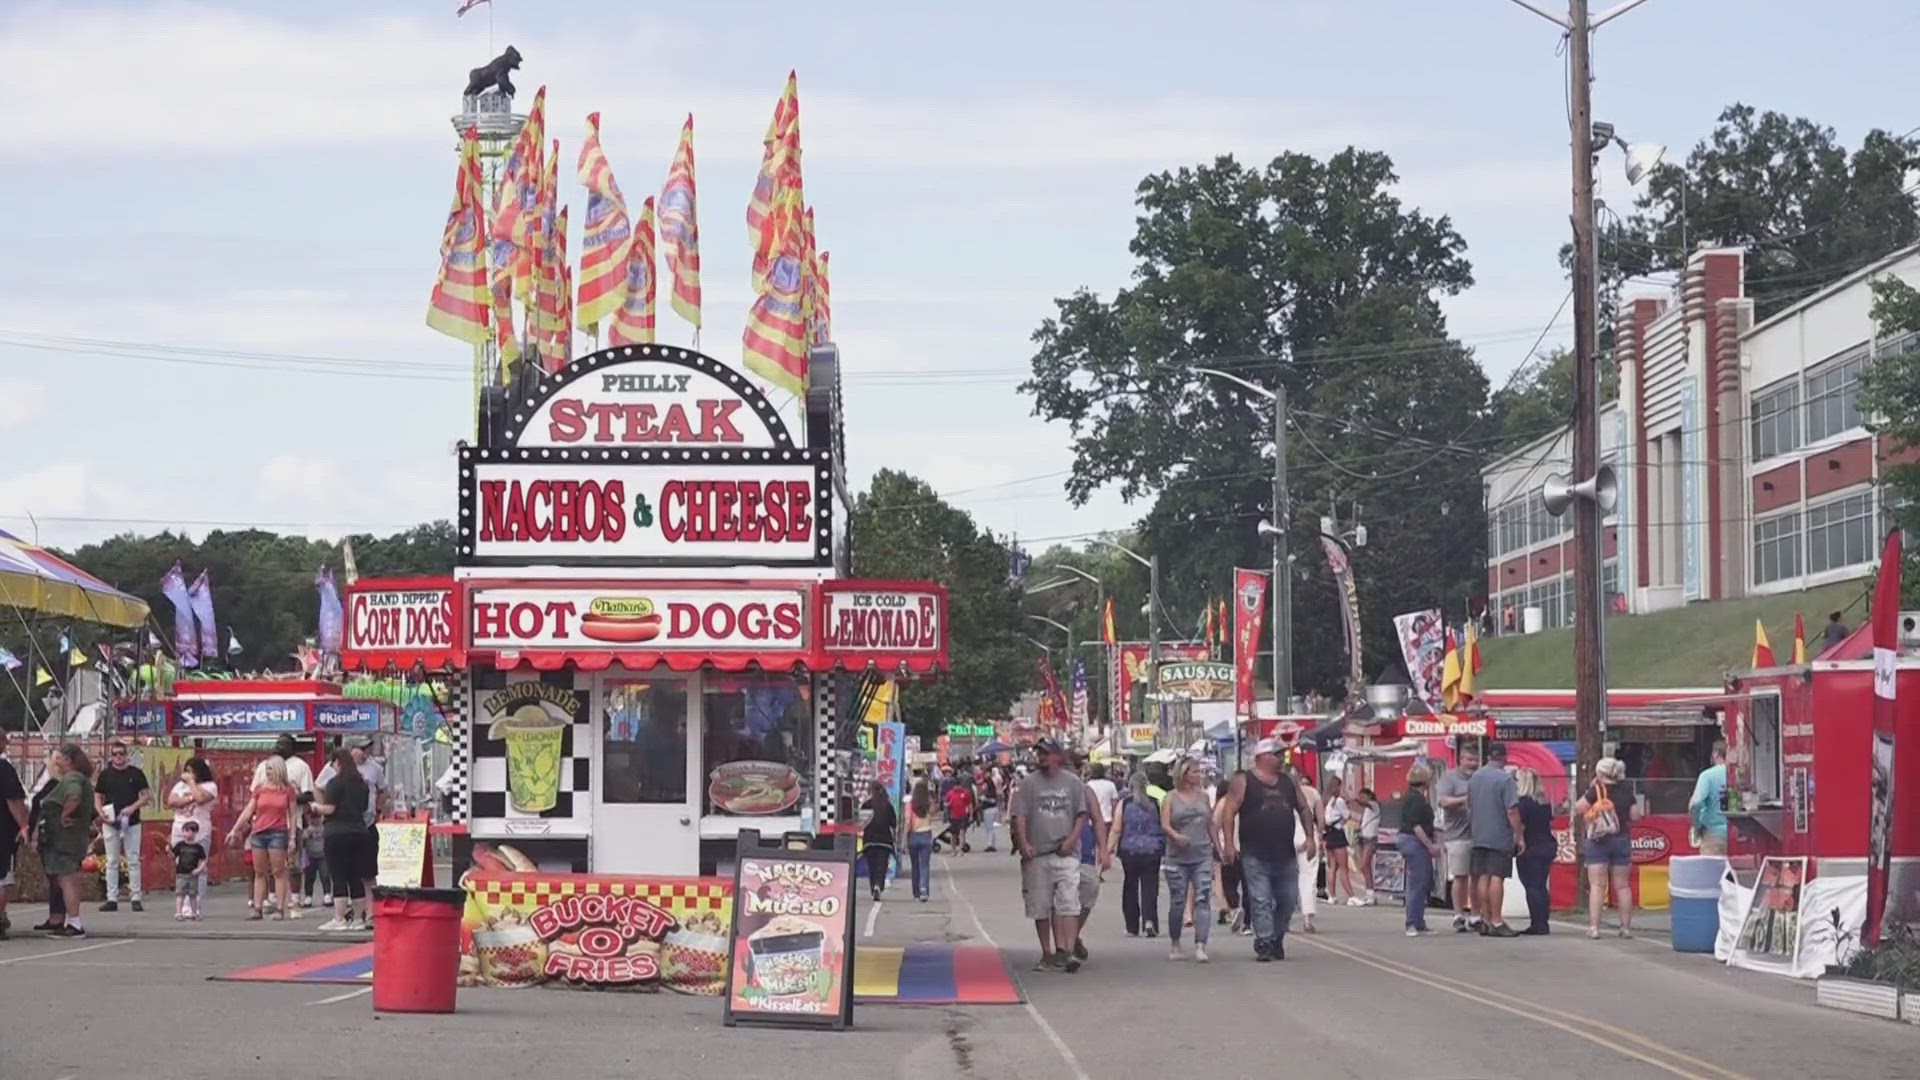 The fair has rides, food, petting zoos and concerts.